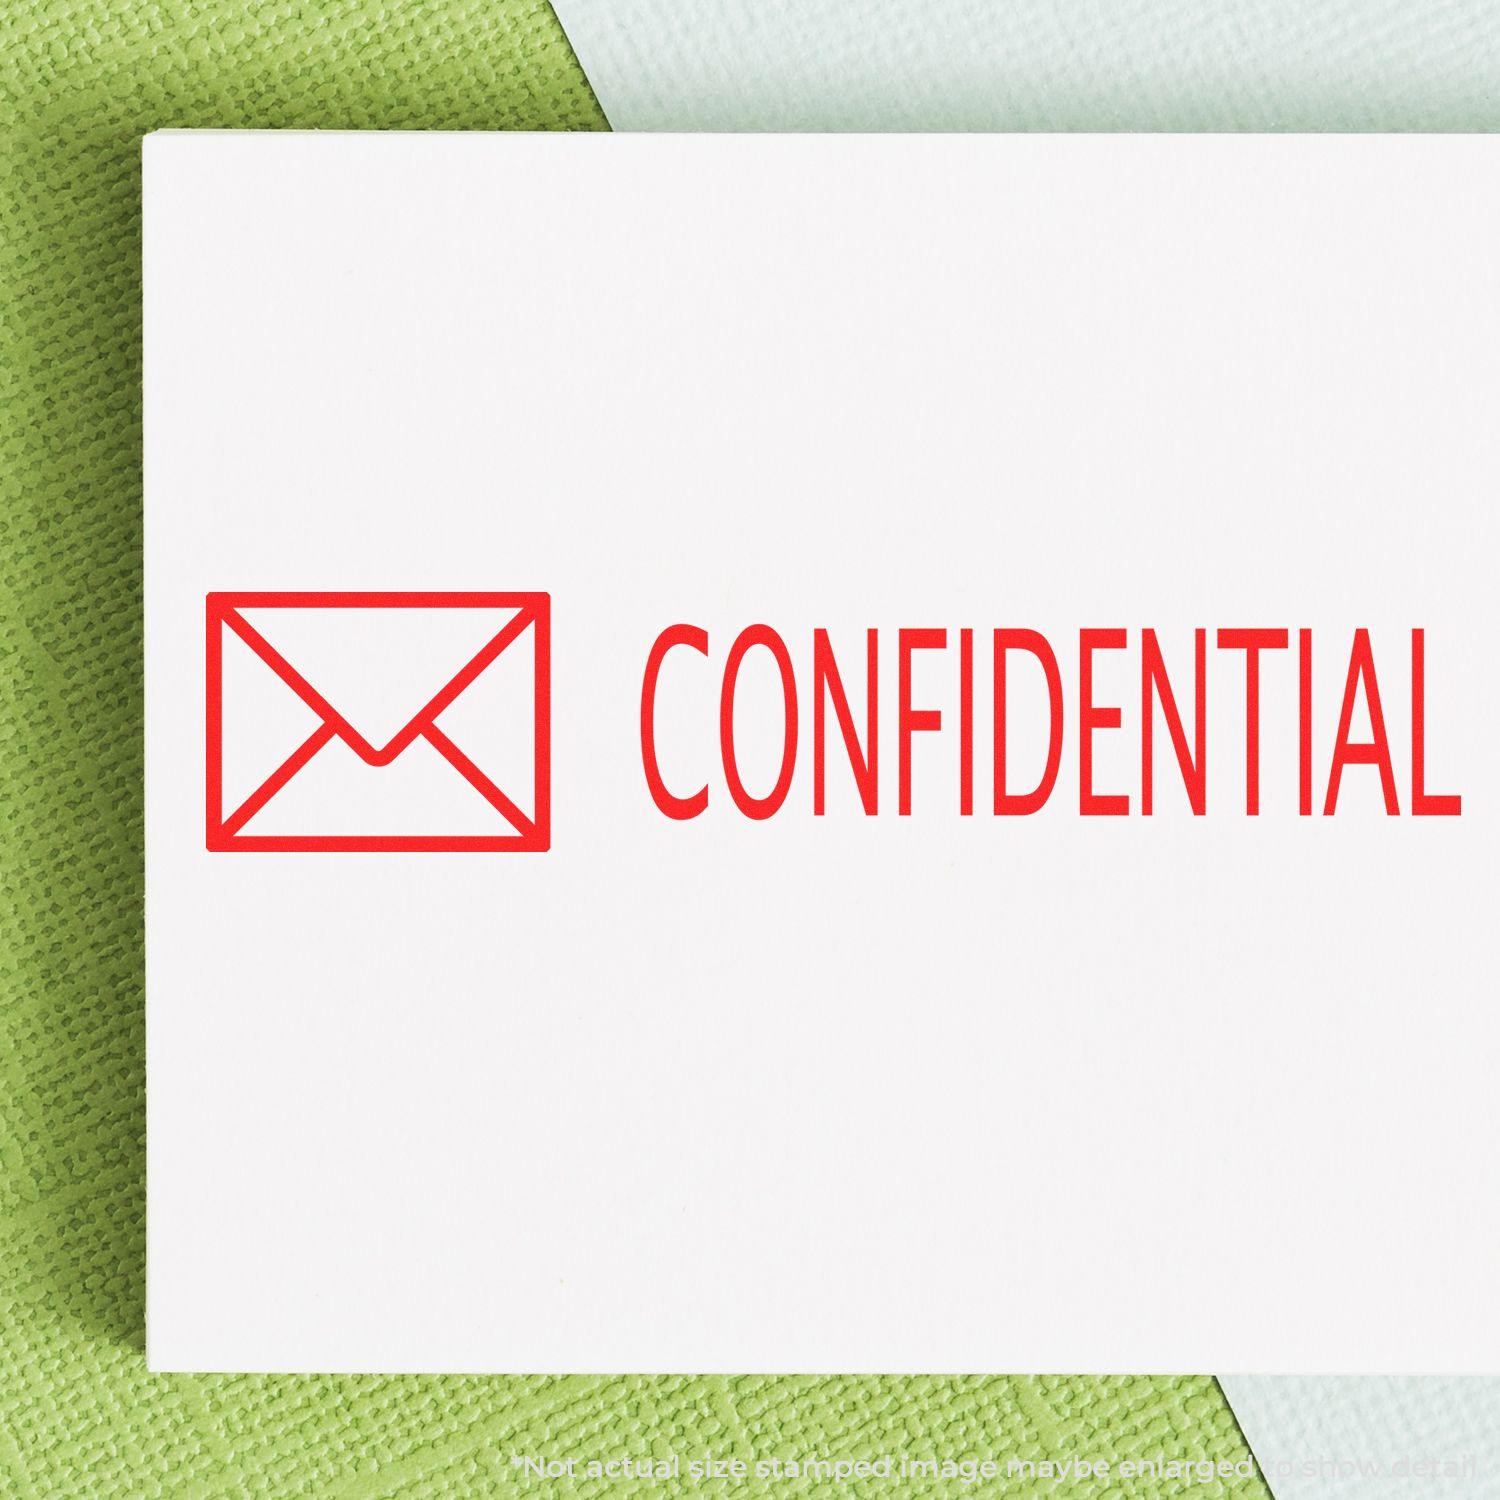 A self-inking stamp with a stamped image showing how the text "CONFIDENTIAL" with an envelope icon on the left is displayed after stamping.